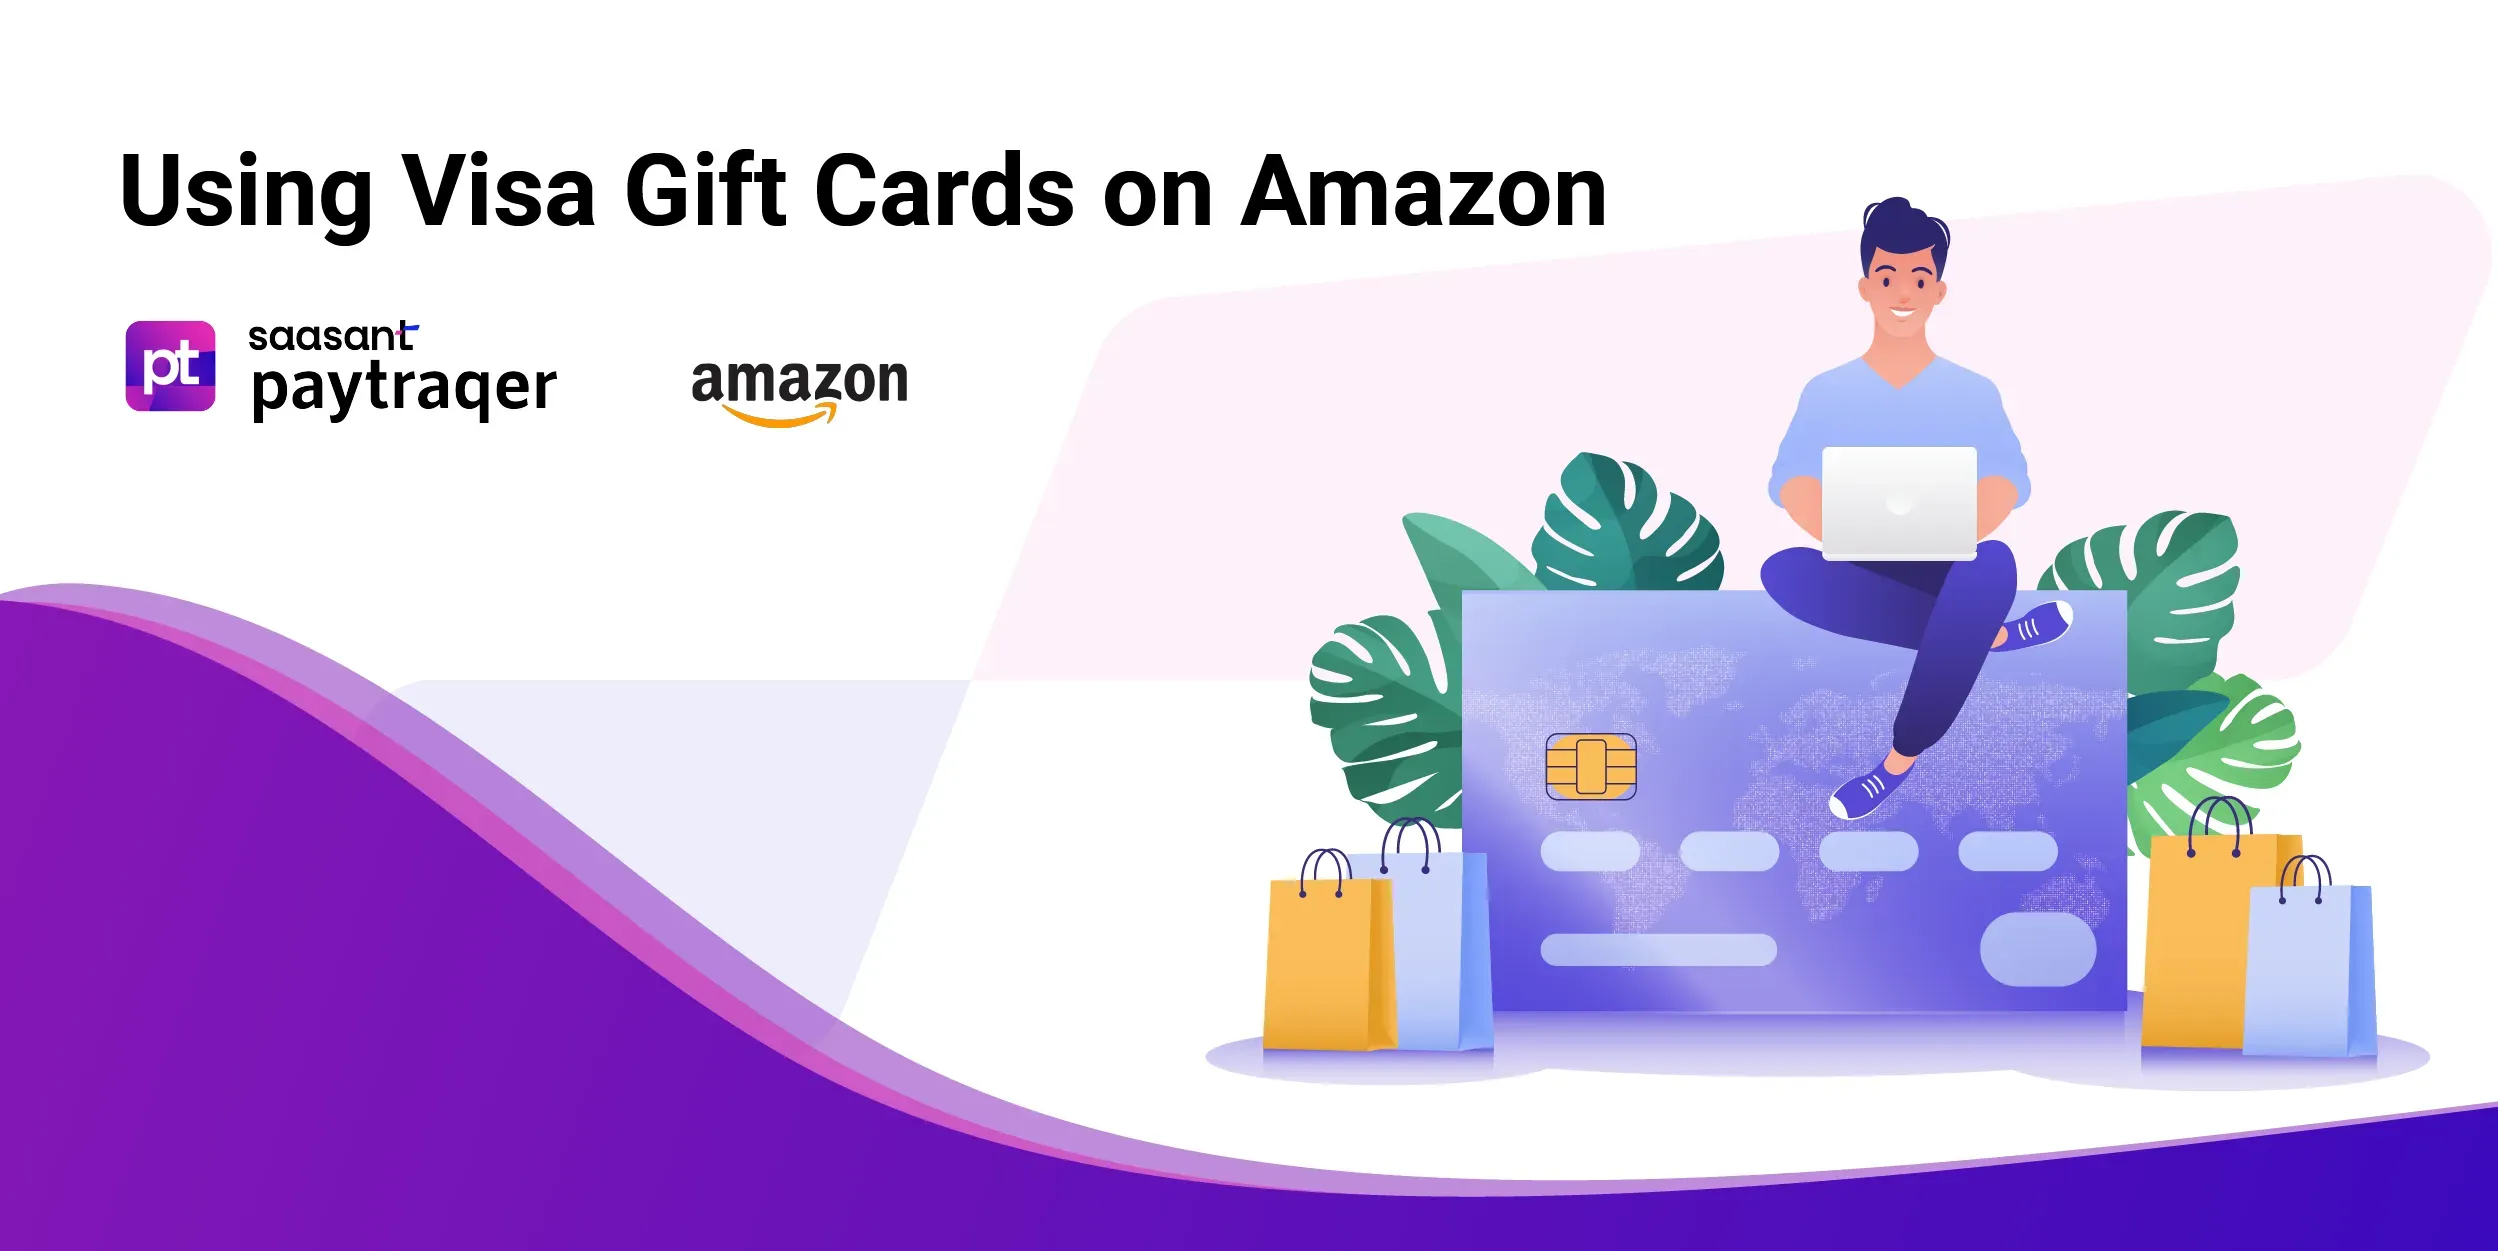 How to Activate a Visa Gift Card - Setting Up a Visa Gift Card